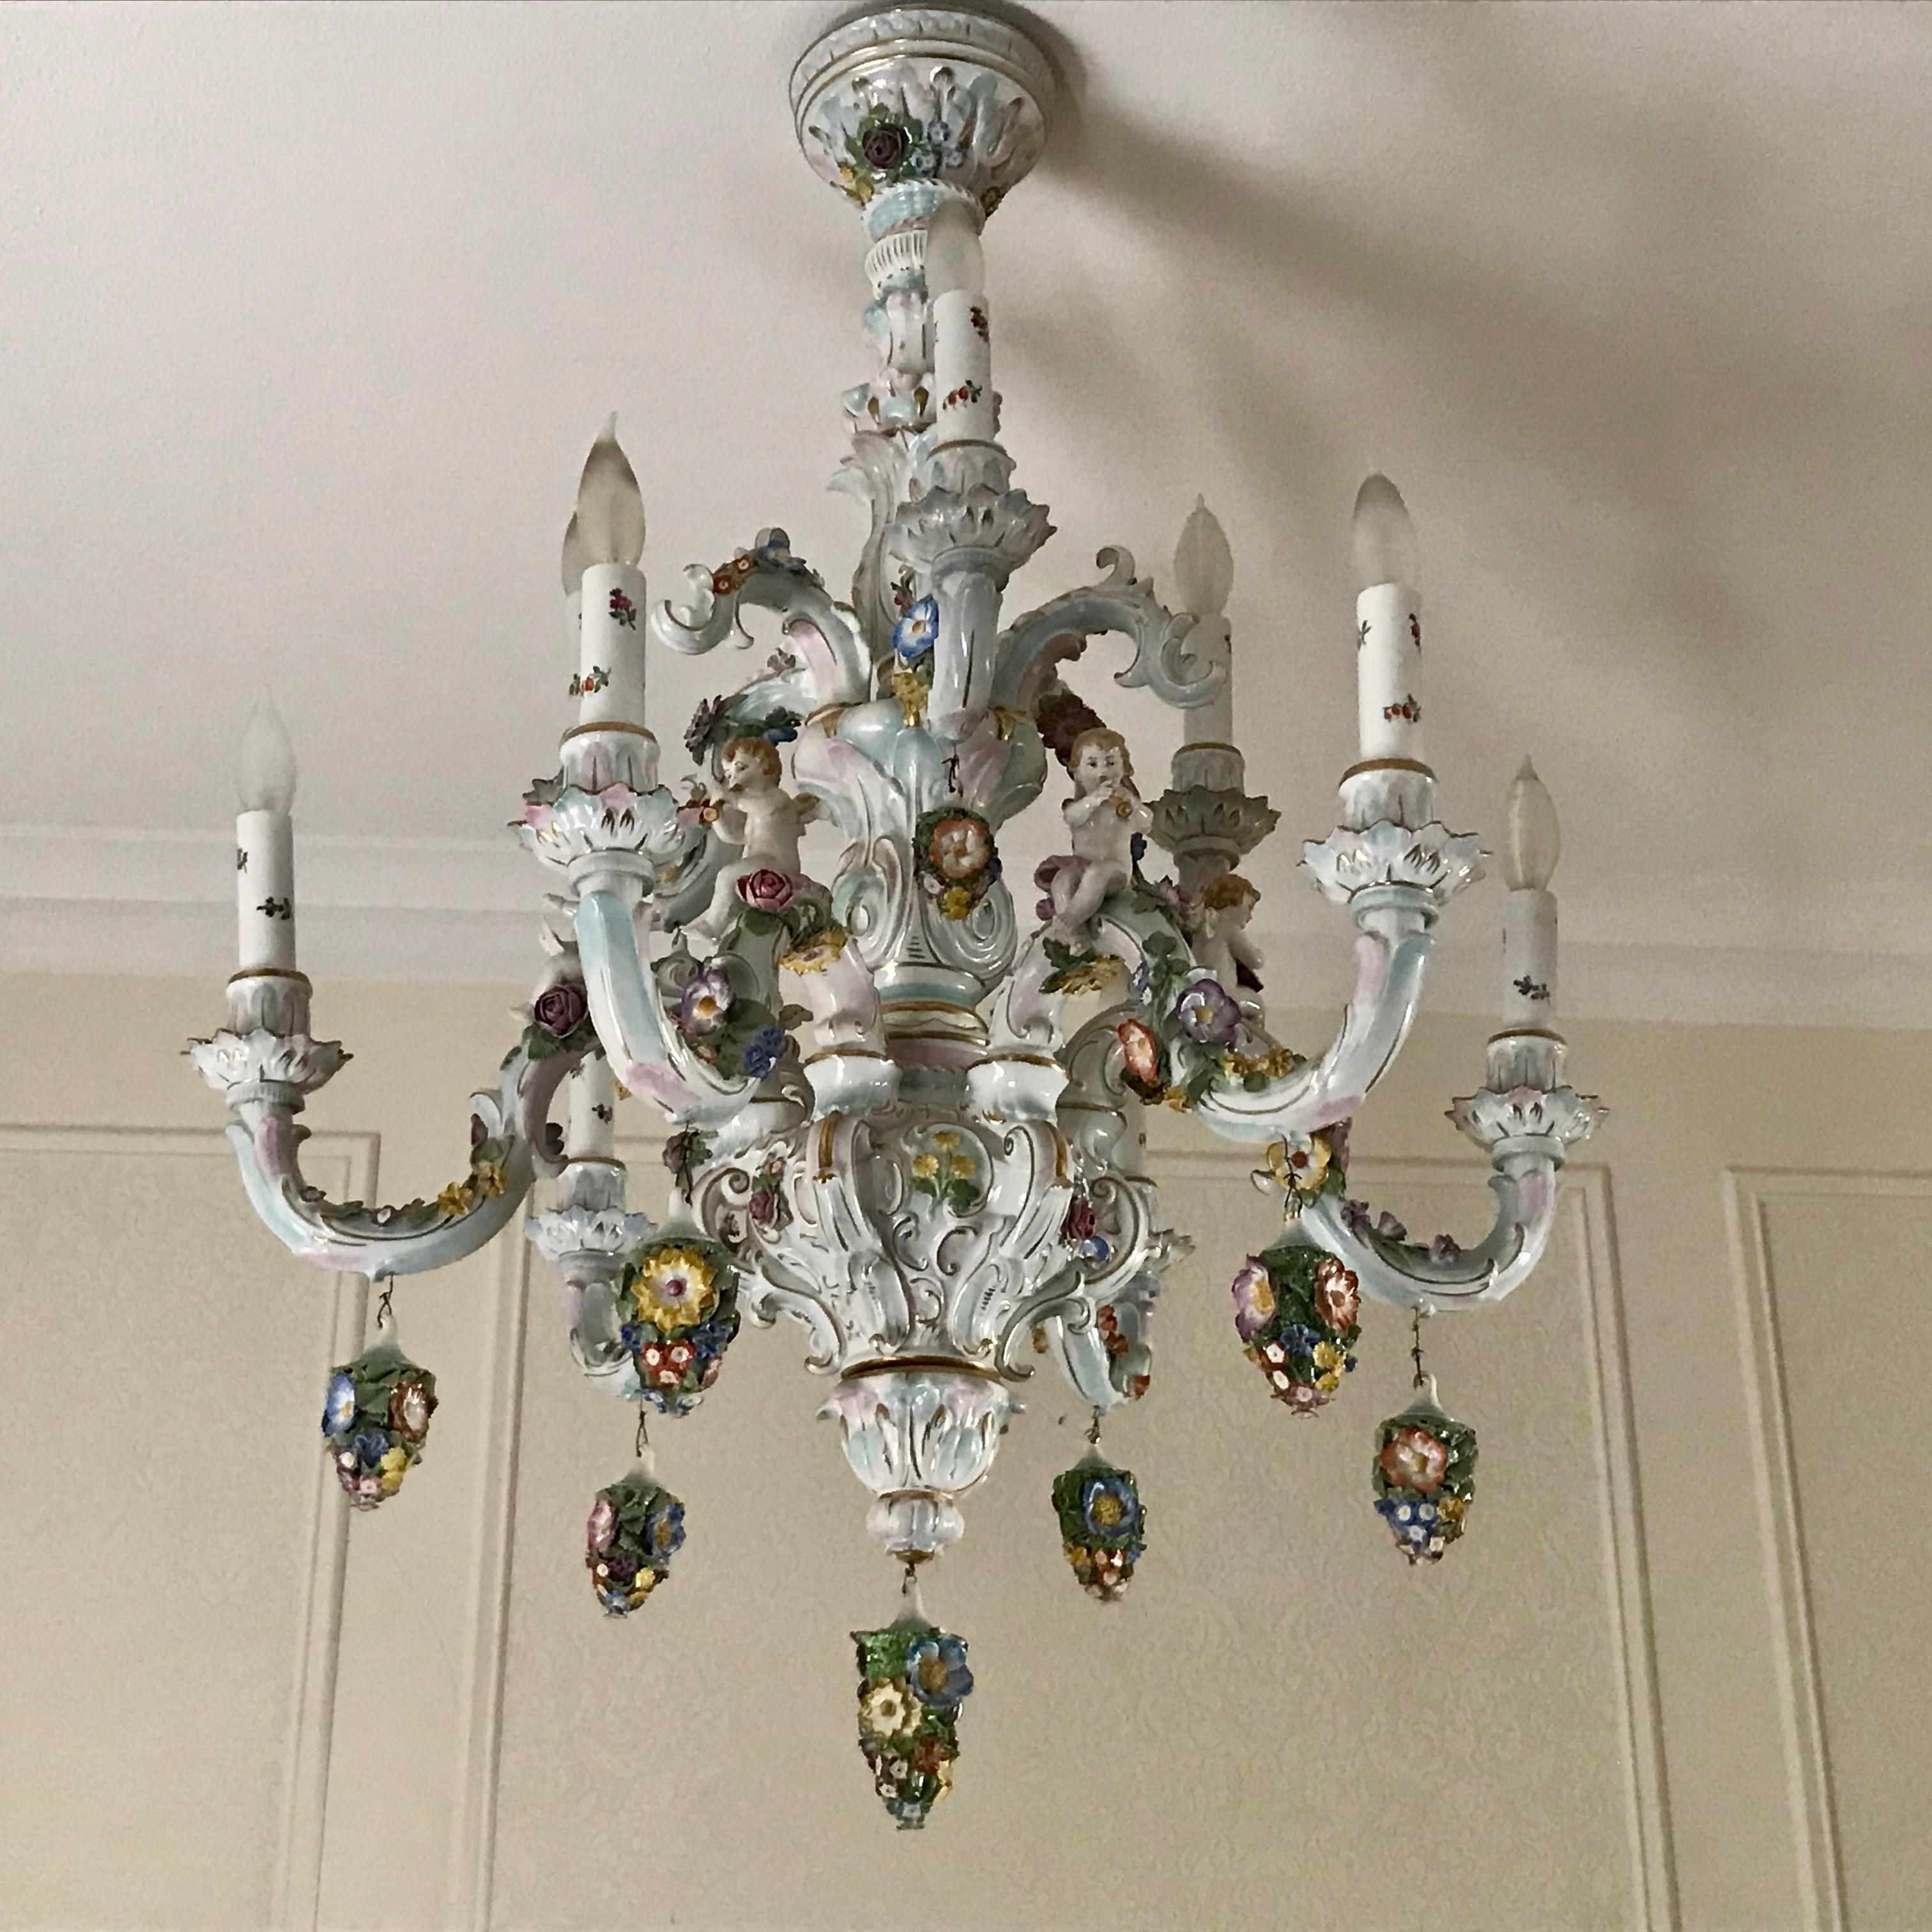 Superior quality and generous scale. The chandelier is fitted with 10 lights 
on its staggered arms - hand painted and appointed with florals, the chandelier
is fashioned with cherubs playing musical instruments in addition, the chandelier 
is